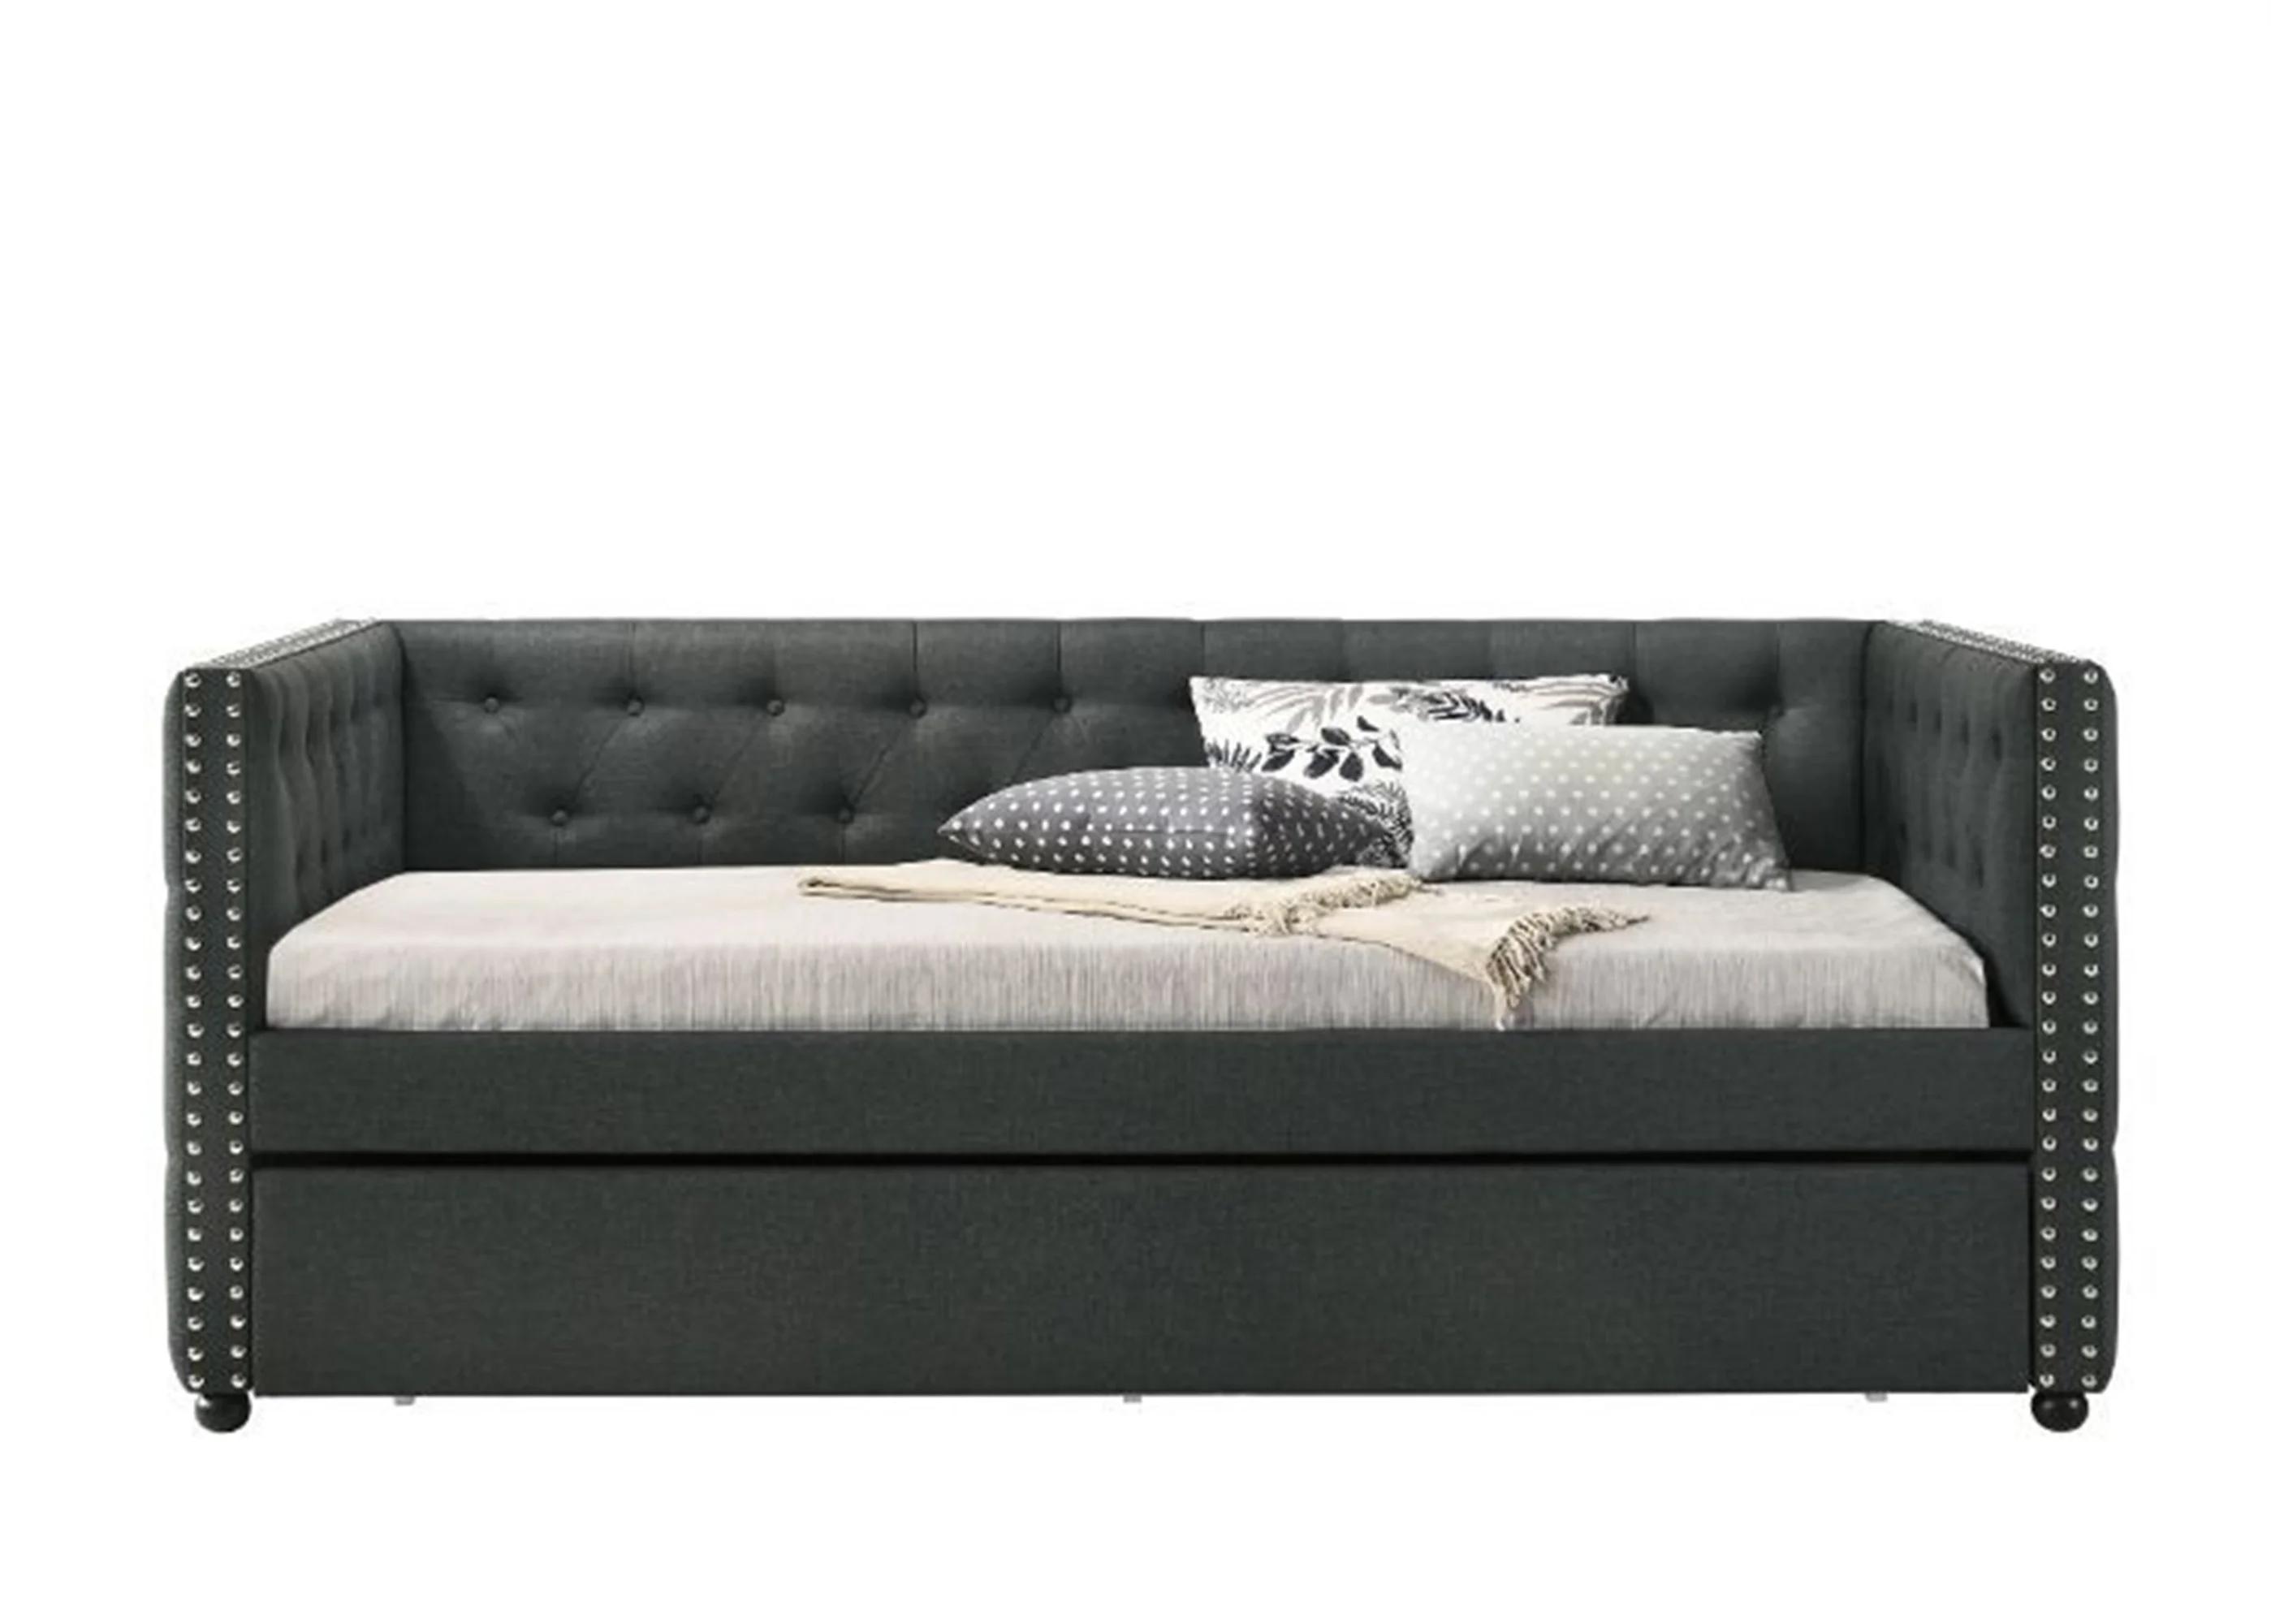 Transitional Daybed w/ trundle Romona 39450 in Gray Fabric